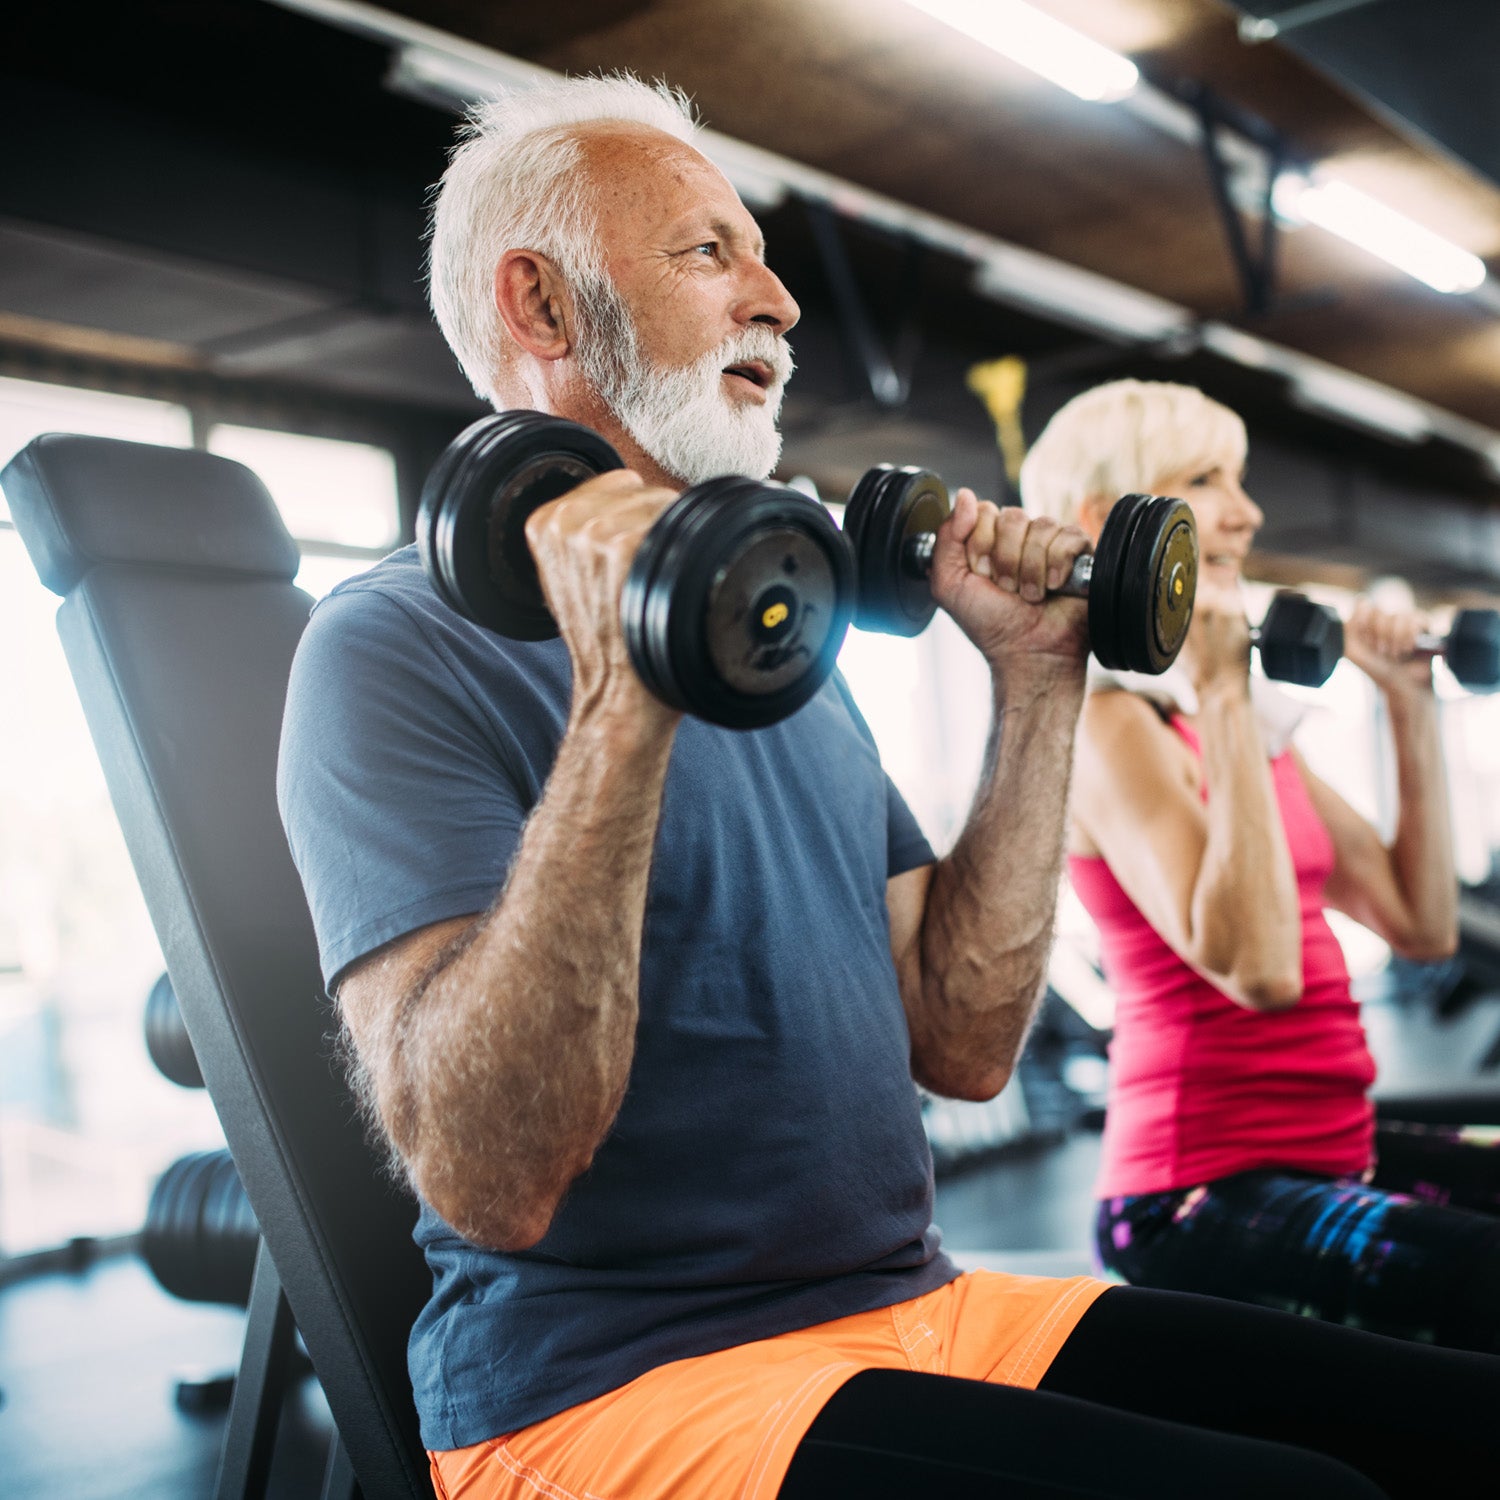 Exercise Boosts Cognitive Function In Older Adults, New Study Confirms